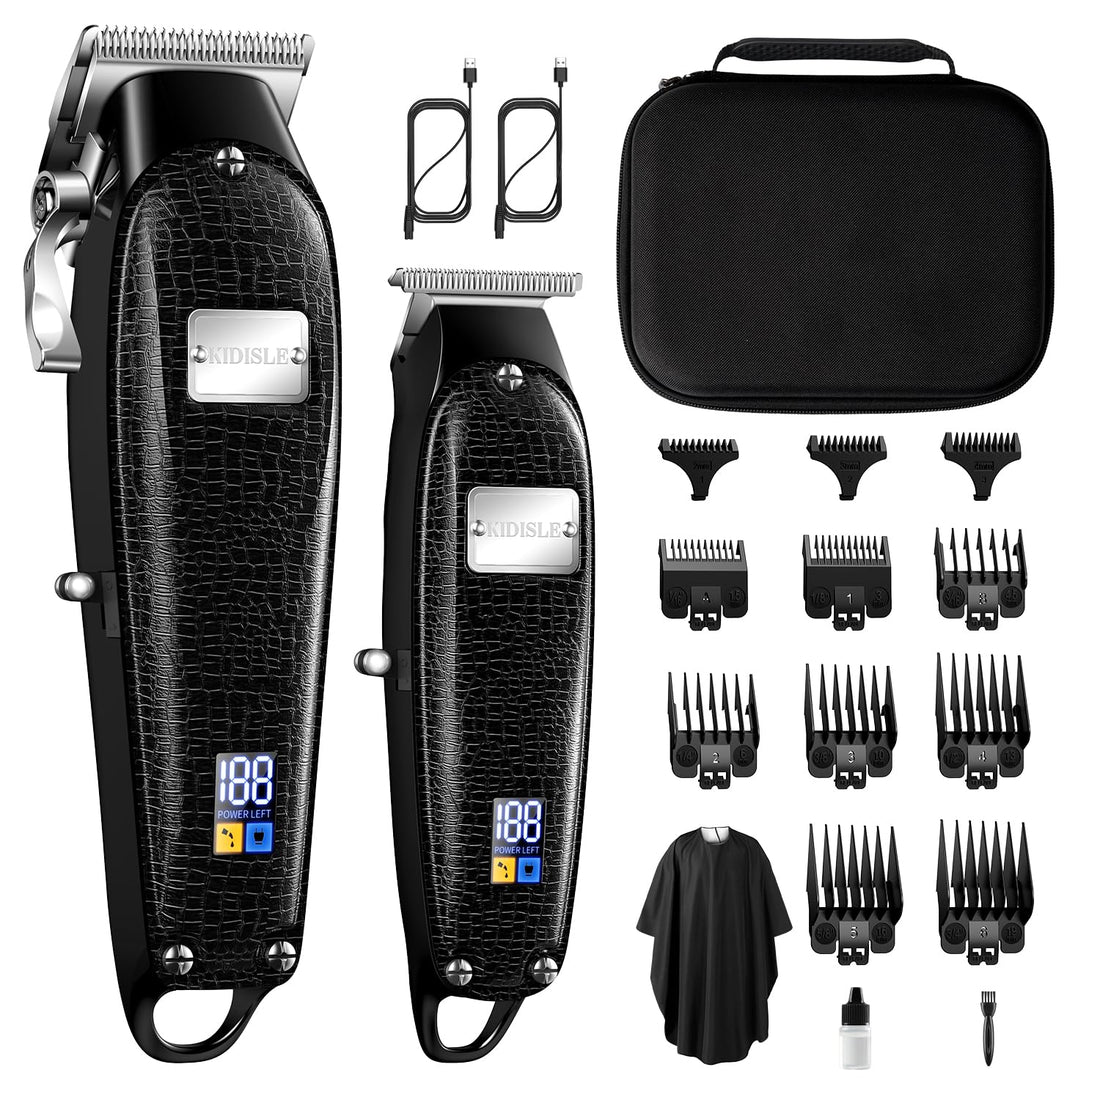 KIDISLE Hair Clippers for Men + T-Blade Barber Clippers, Precise Clippers for Hair Cutting, Cordless Hair Clippers, Led Display, Professional Hair Clippers, Fade Hair Trimmer with Travel Case